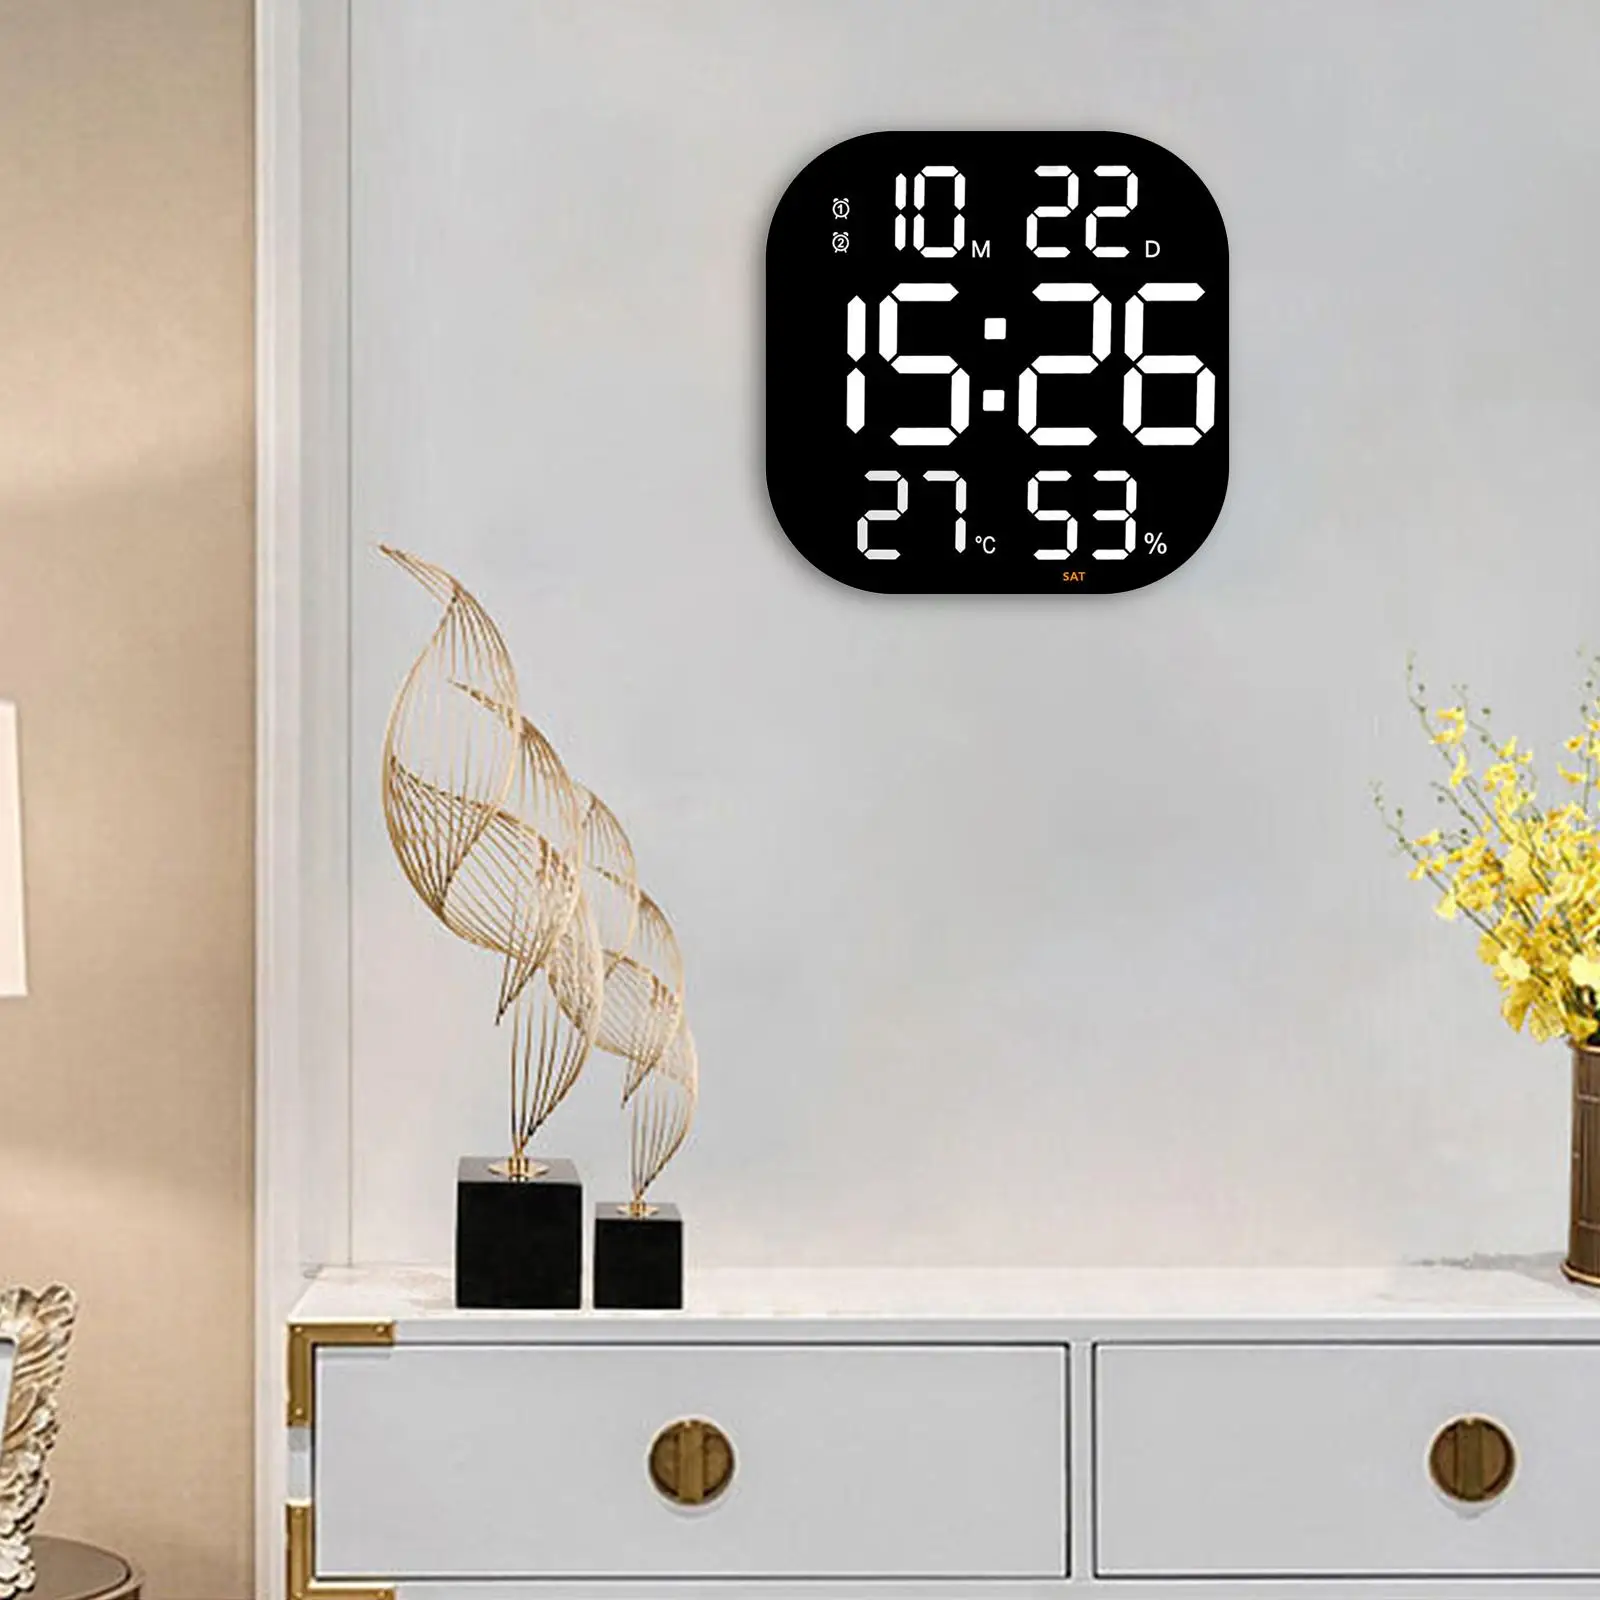 Digital Wall Clock Large Screen Temperature Month Date Display Silent Electronic Alarm Clock for Bedroom Living Room